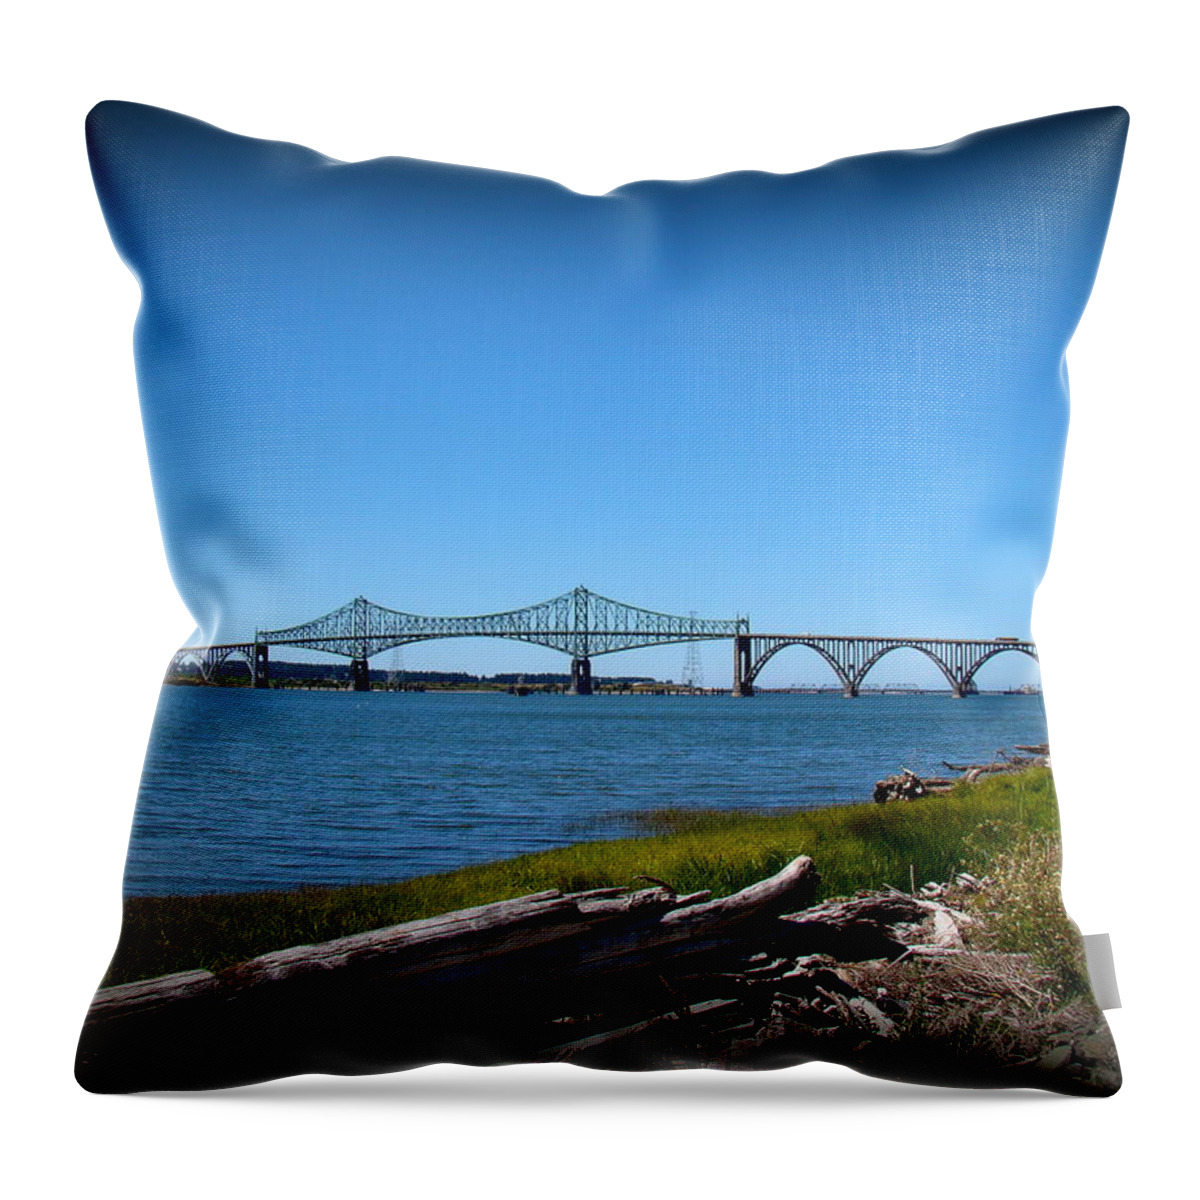 Coos Bay Throw Pillow featuring the photograph Coos Bay Bridge by Nick Kloepping